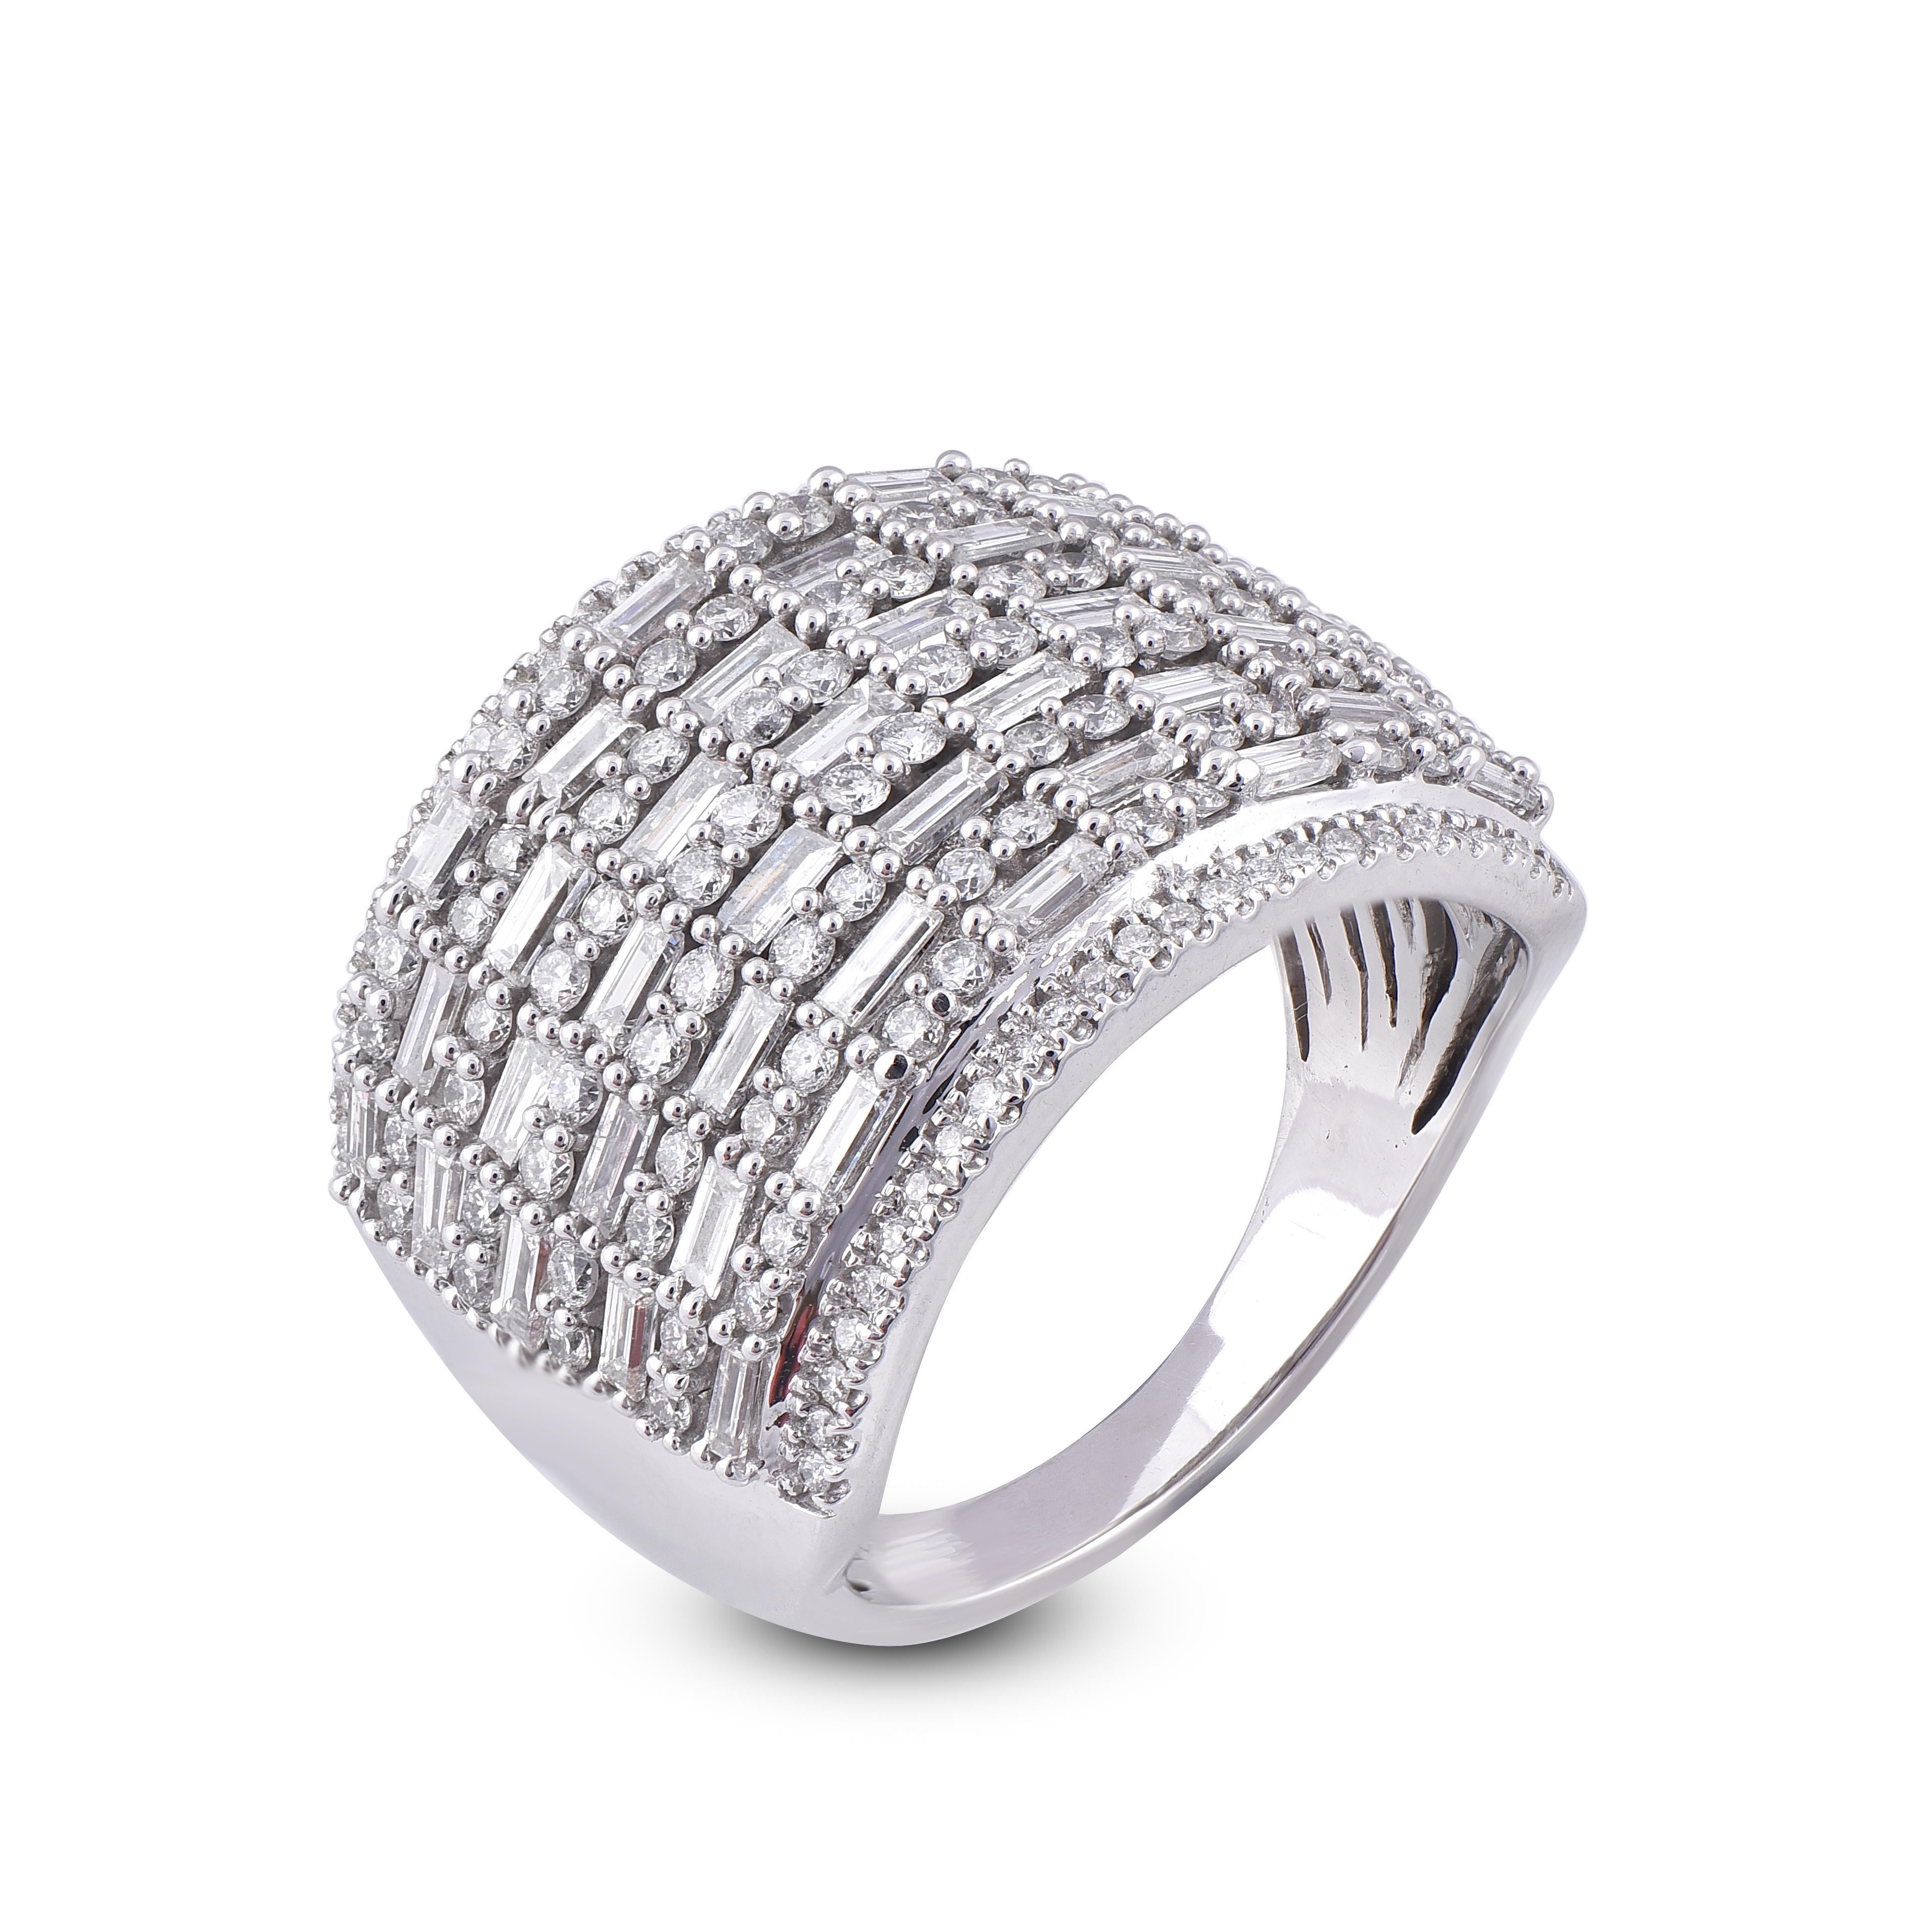 Stunning and classic, this diamond ring is beautifully crafted in 14 Karat white gold. This engagement band ring is studded with sparkling 128 round diamonds and 41 Bauguette diamond in secured with Pave & Prong setting. The diamonds are natural,